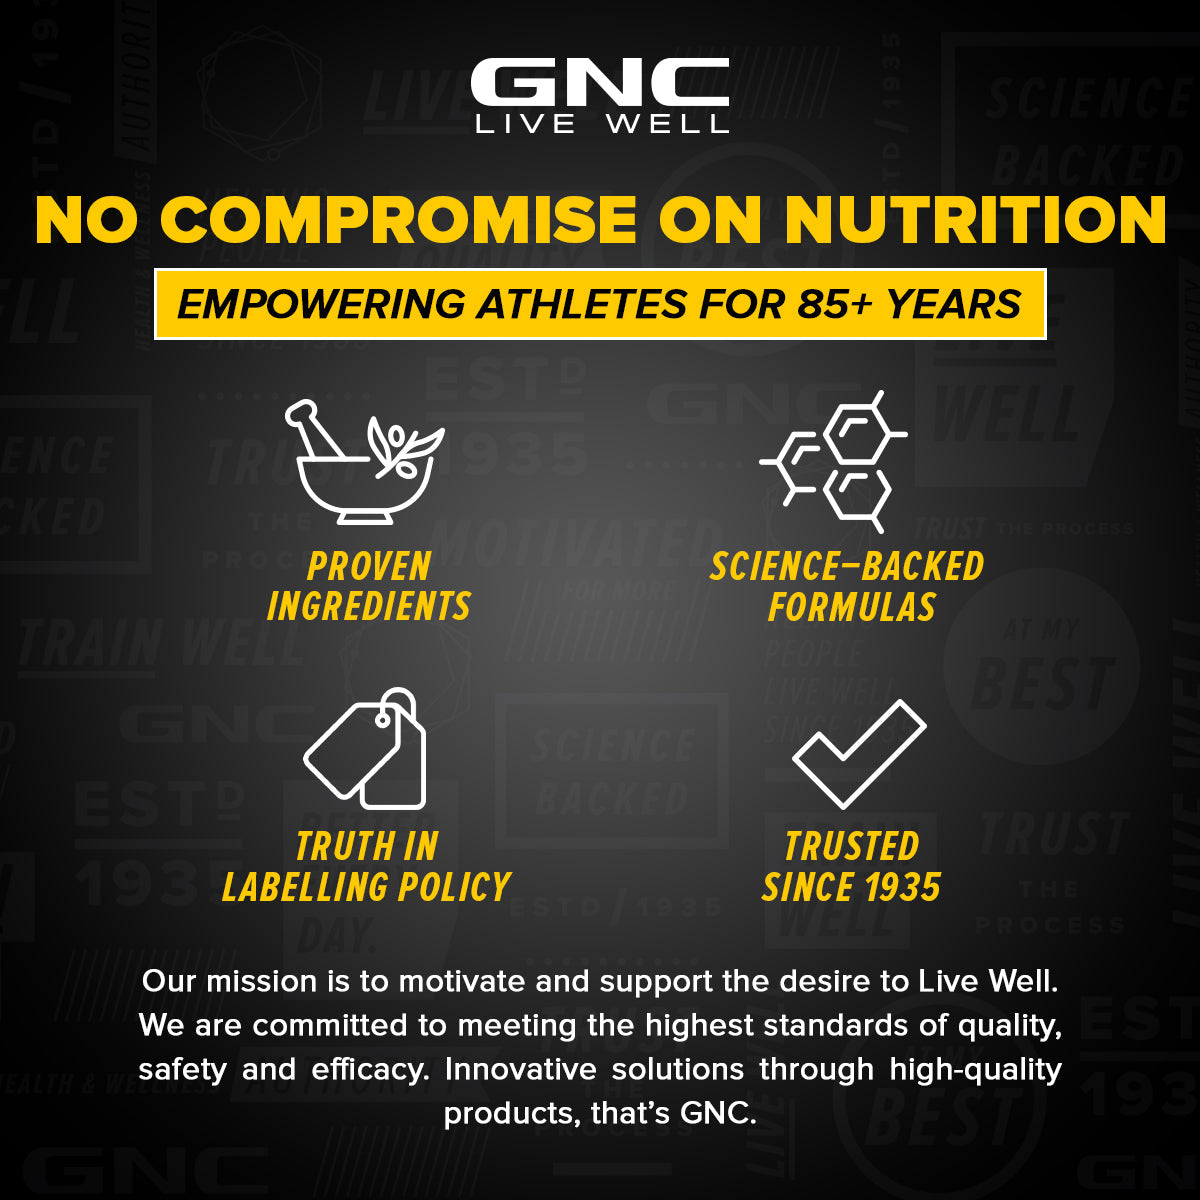 GNC Pro Performance 100% Whey Protein - Clearance Sale - Faster Recovery & Lean Muscle Gains | Informed Choice Certified